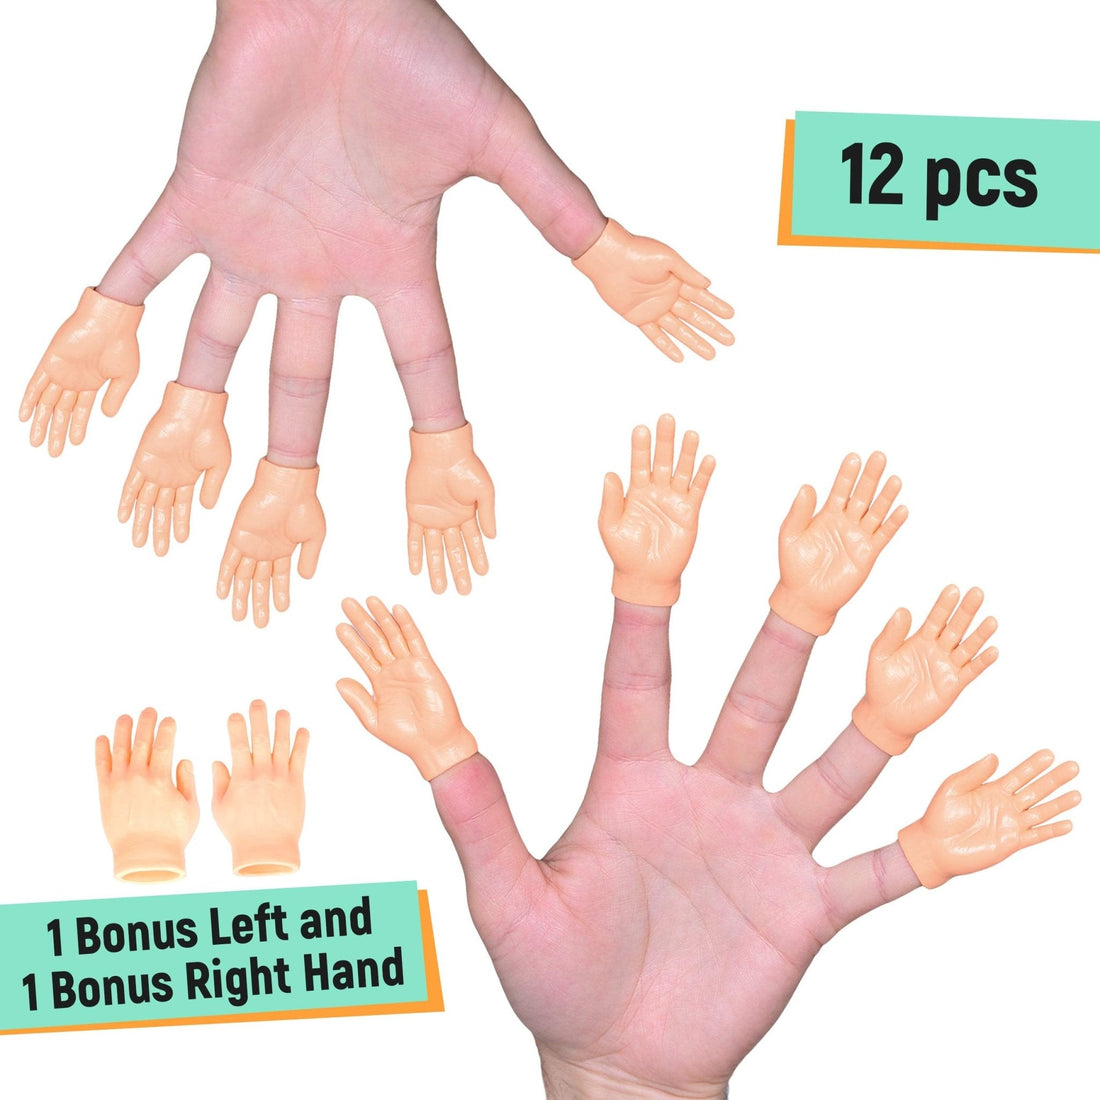 The Best Tiny Hands Gag Gift Comes With Something Extra - NextClimb Tiny Hands Pack With 12 (Not 10) Hands NextClimb